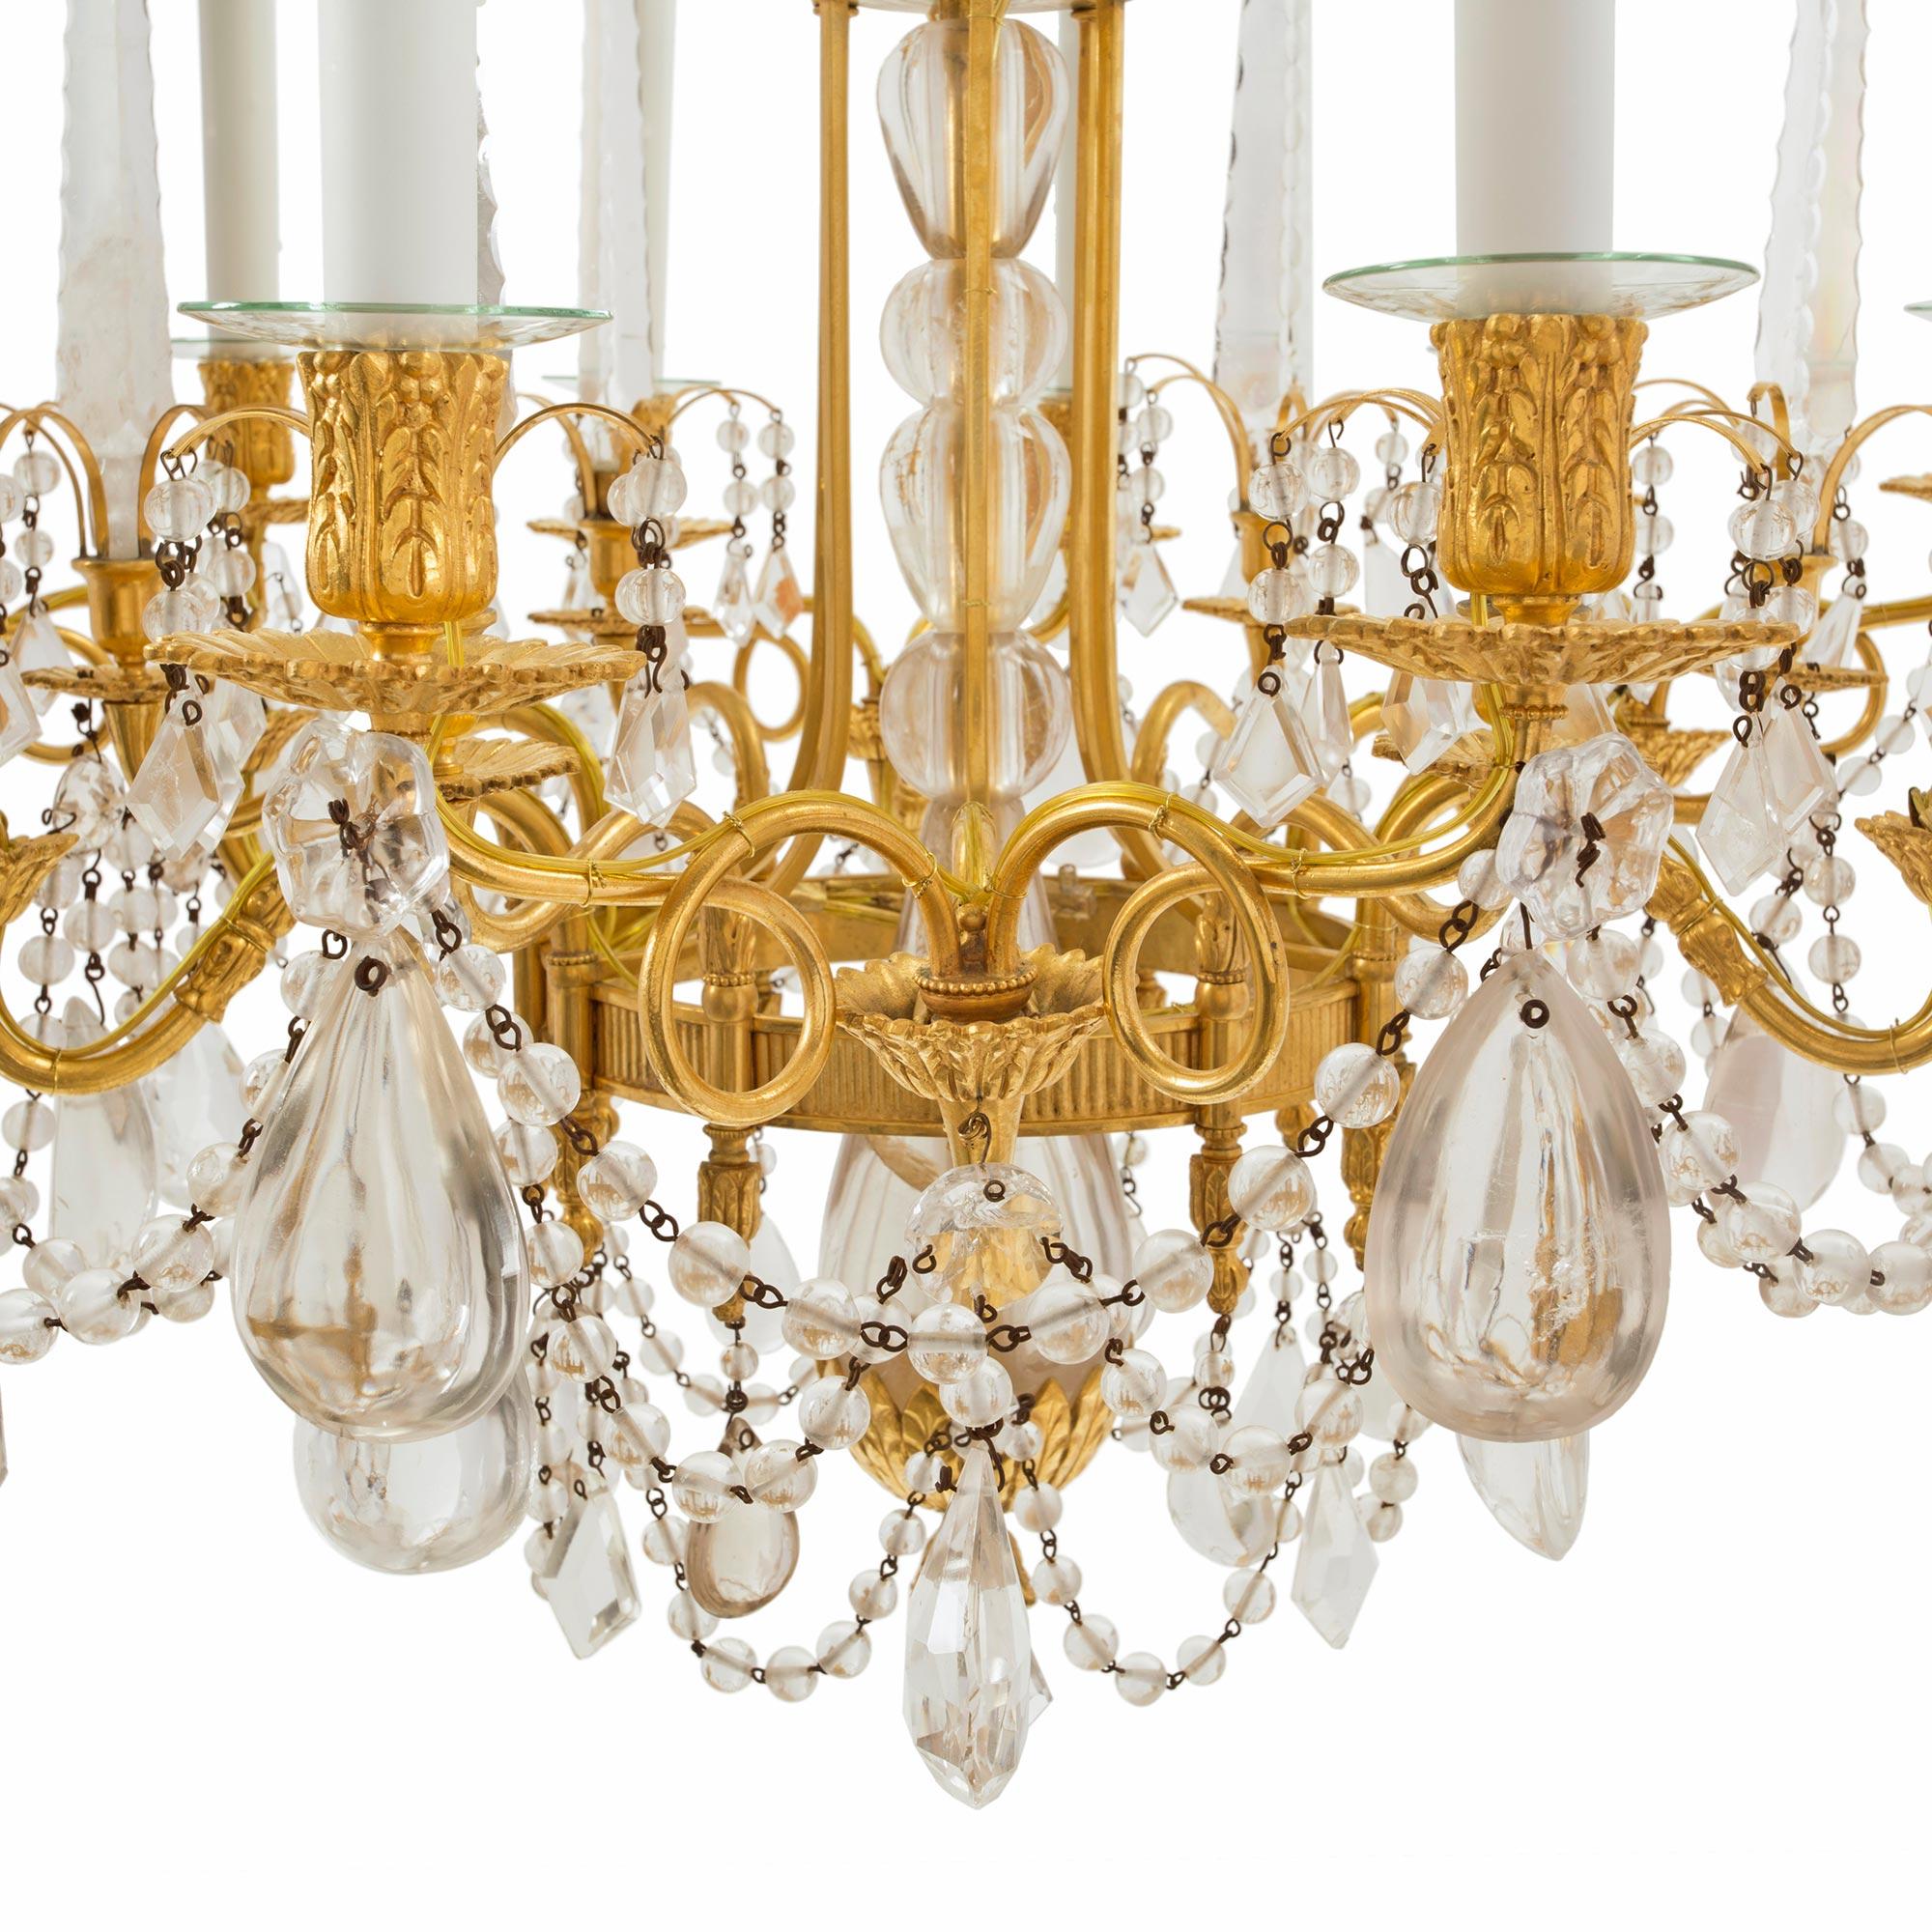 Russian Imperial 19th Century Neoclassical Style Rock Crystal Chandelier For Sale 1